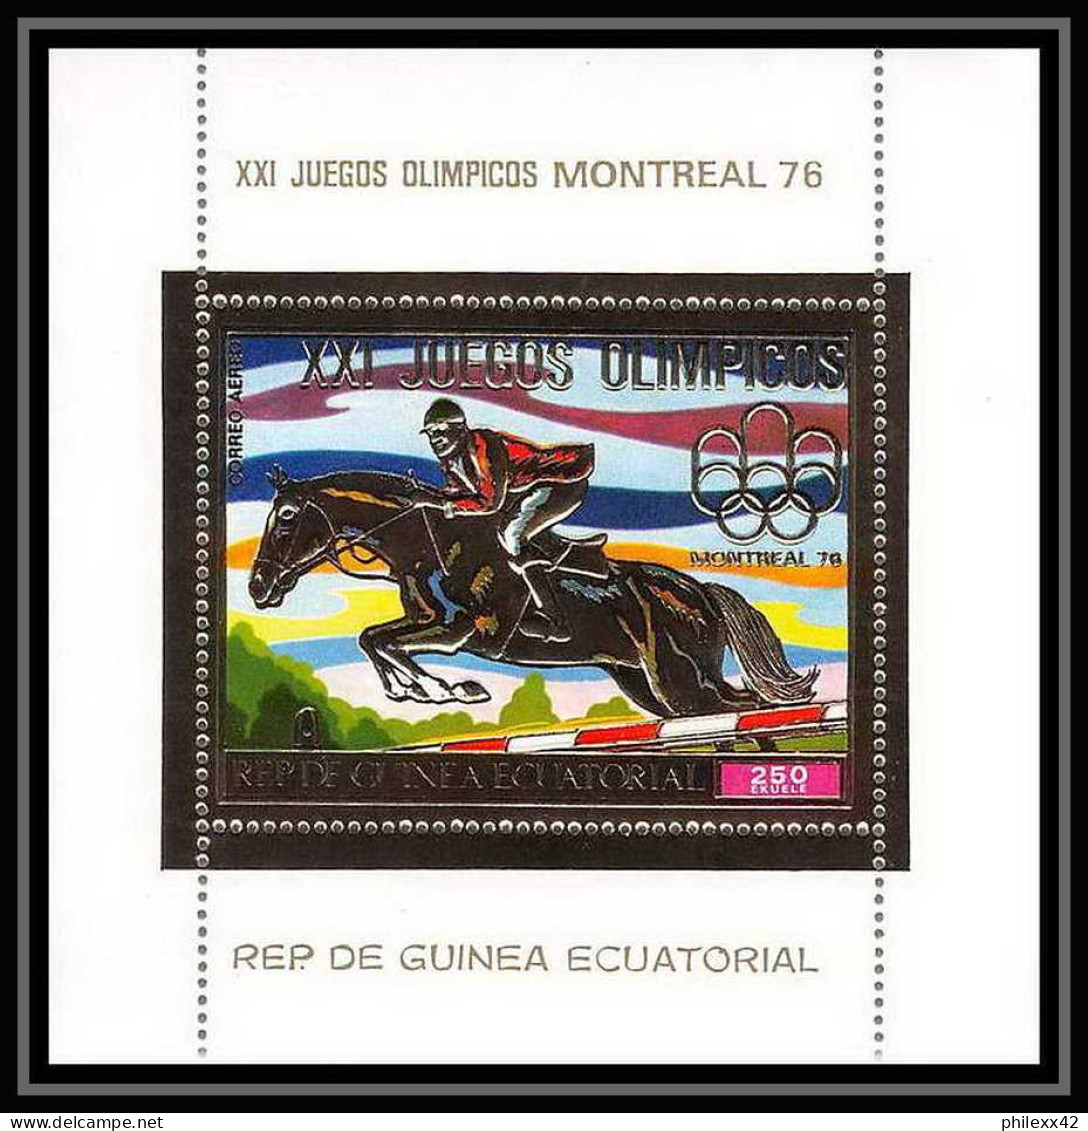 198 Guinée équatoriale Guinea Bloc N°225 OR Gold Stamps Jeux Olympiques Olympic Games 1976 Montreal Jumping Cheval - Jumping